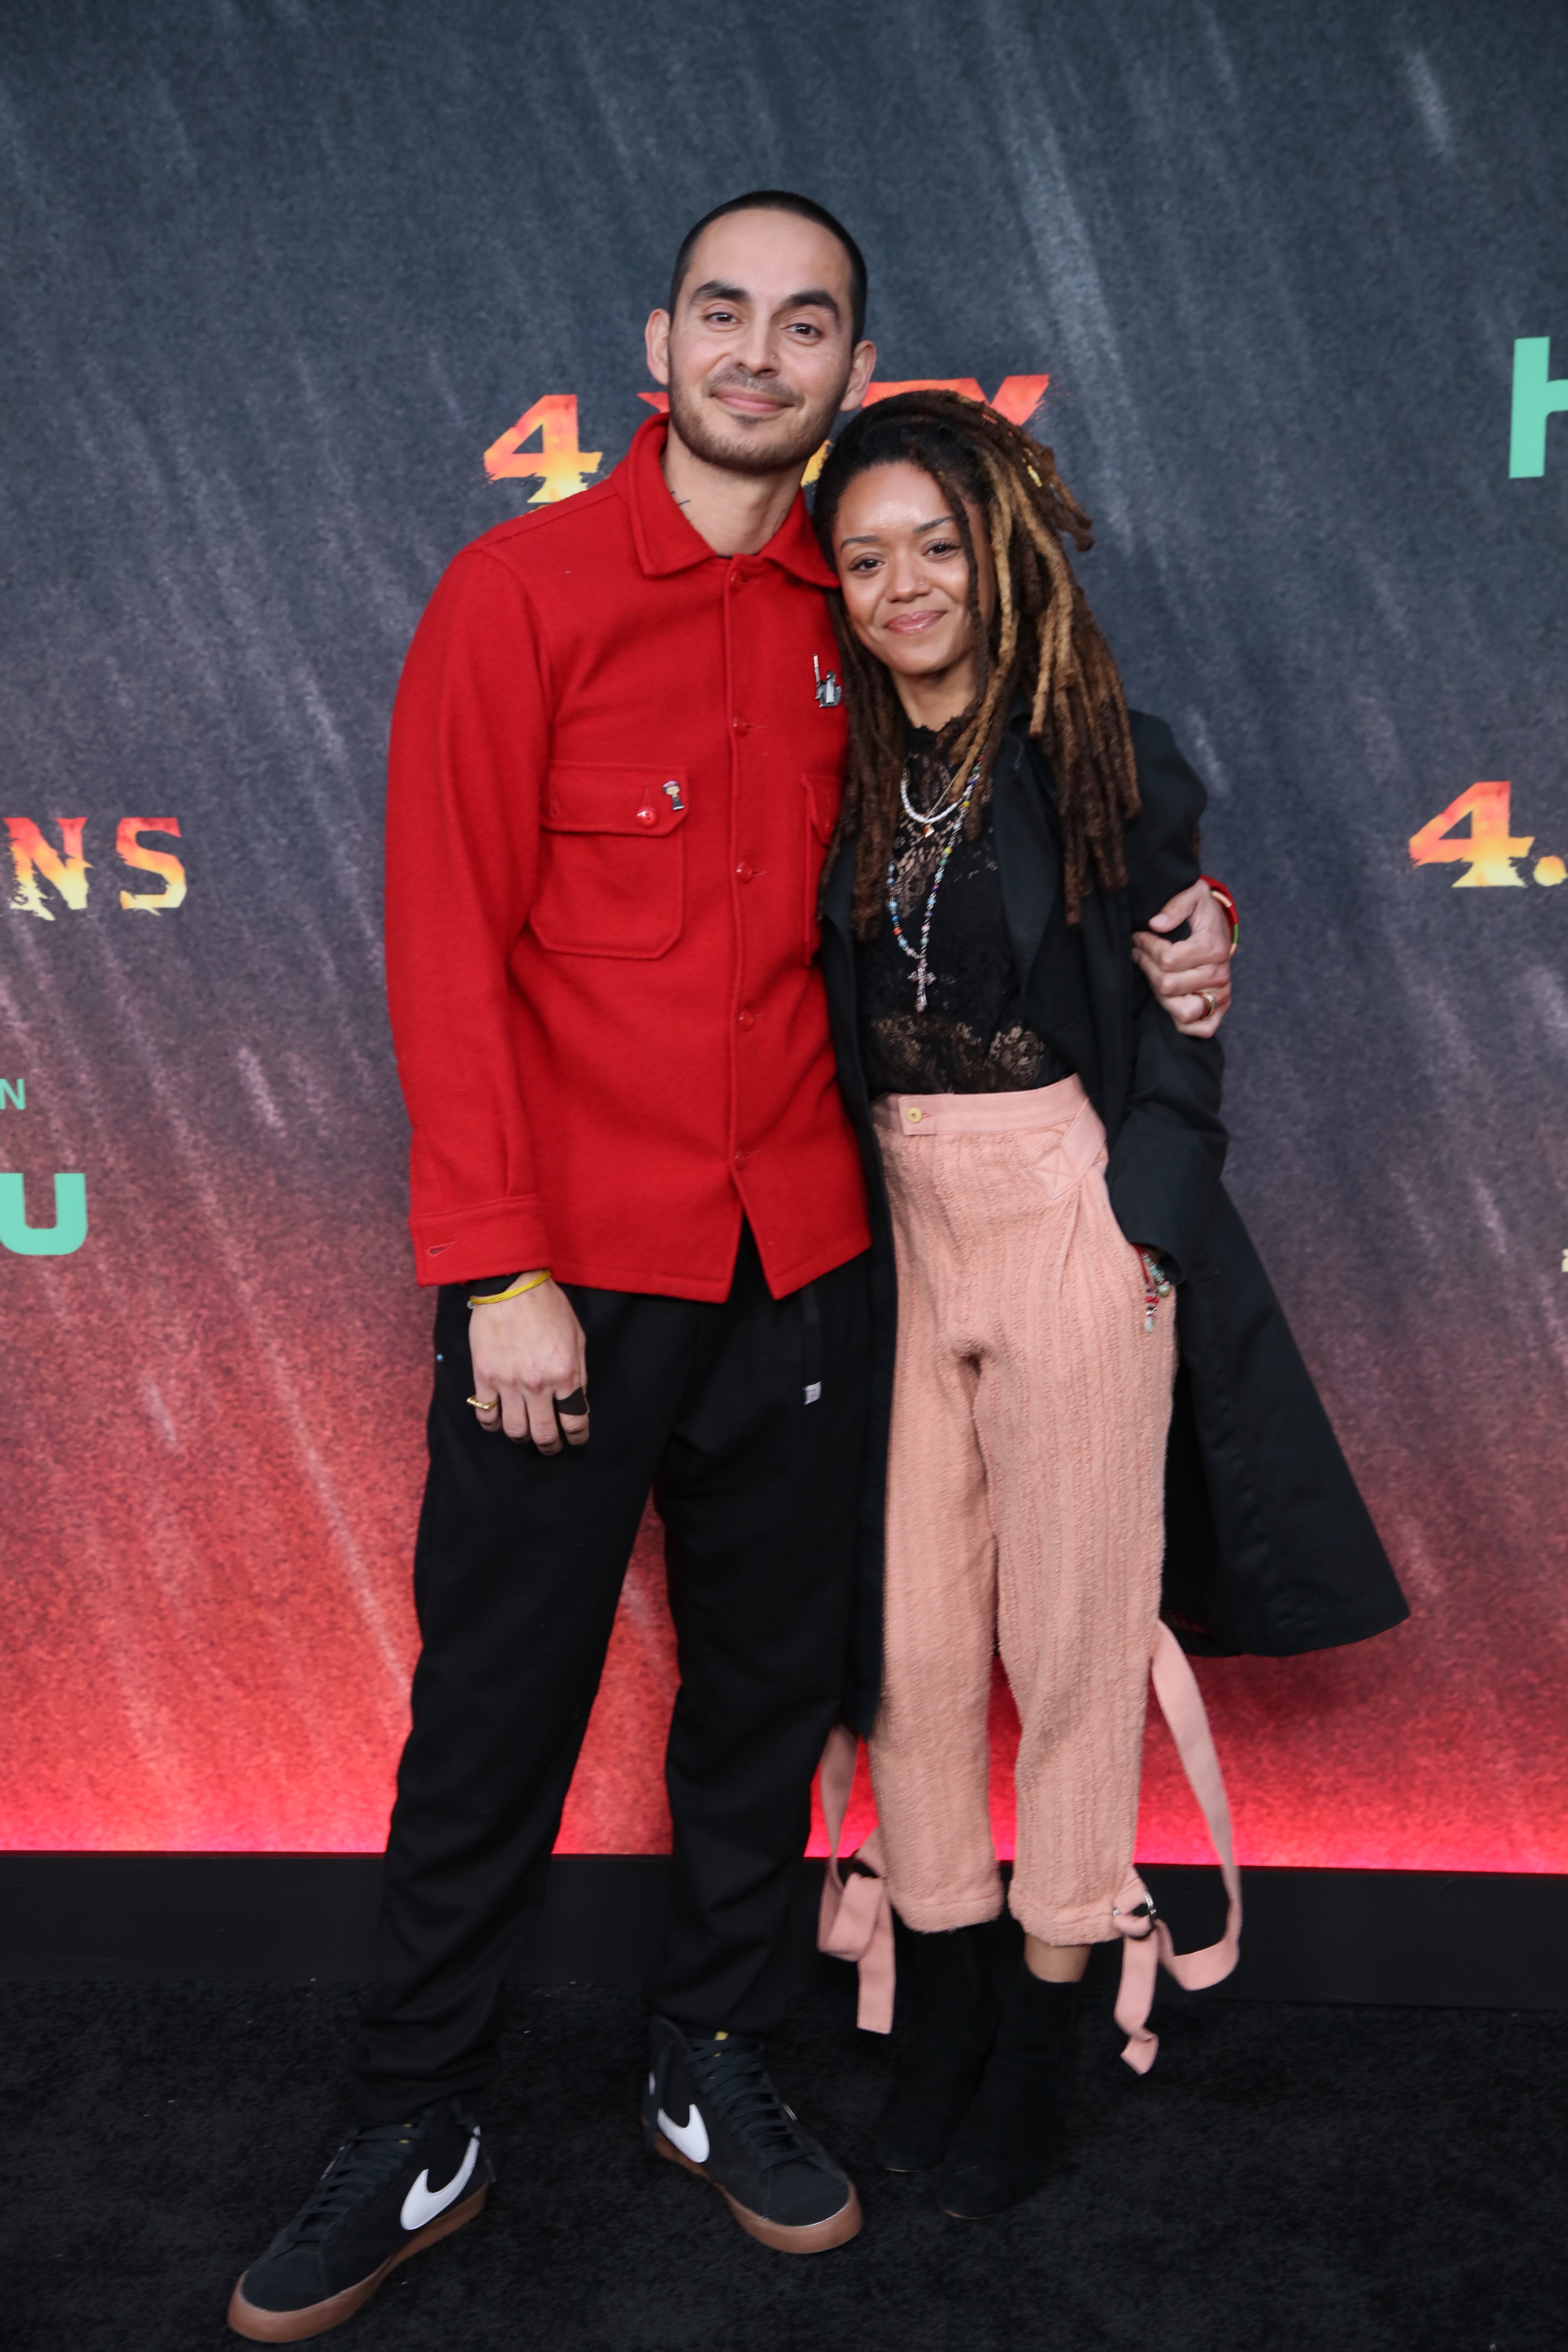 Manny Montana and Adelfa Marr at the Season 4 premiere of "Mayans M.C." on April 18, 2022, in Los Angeles, California. | Source: Getty Images